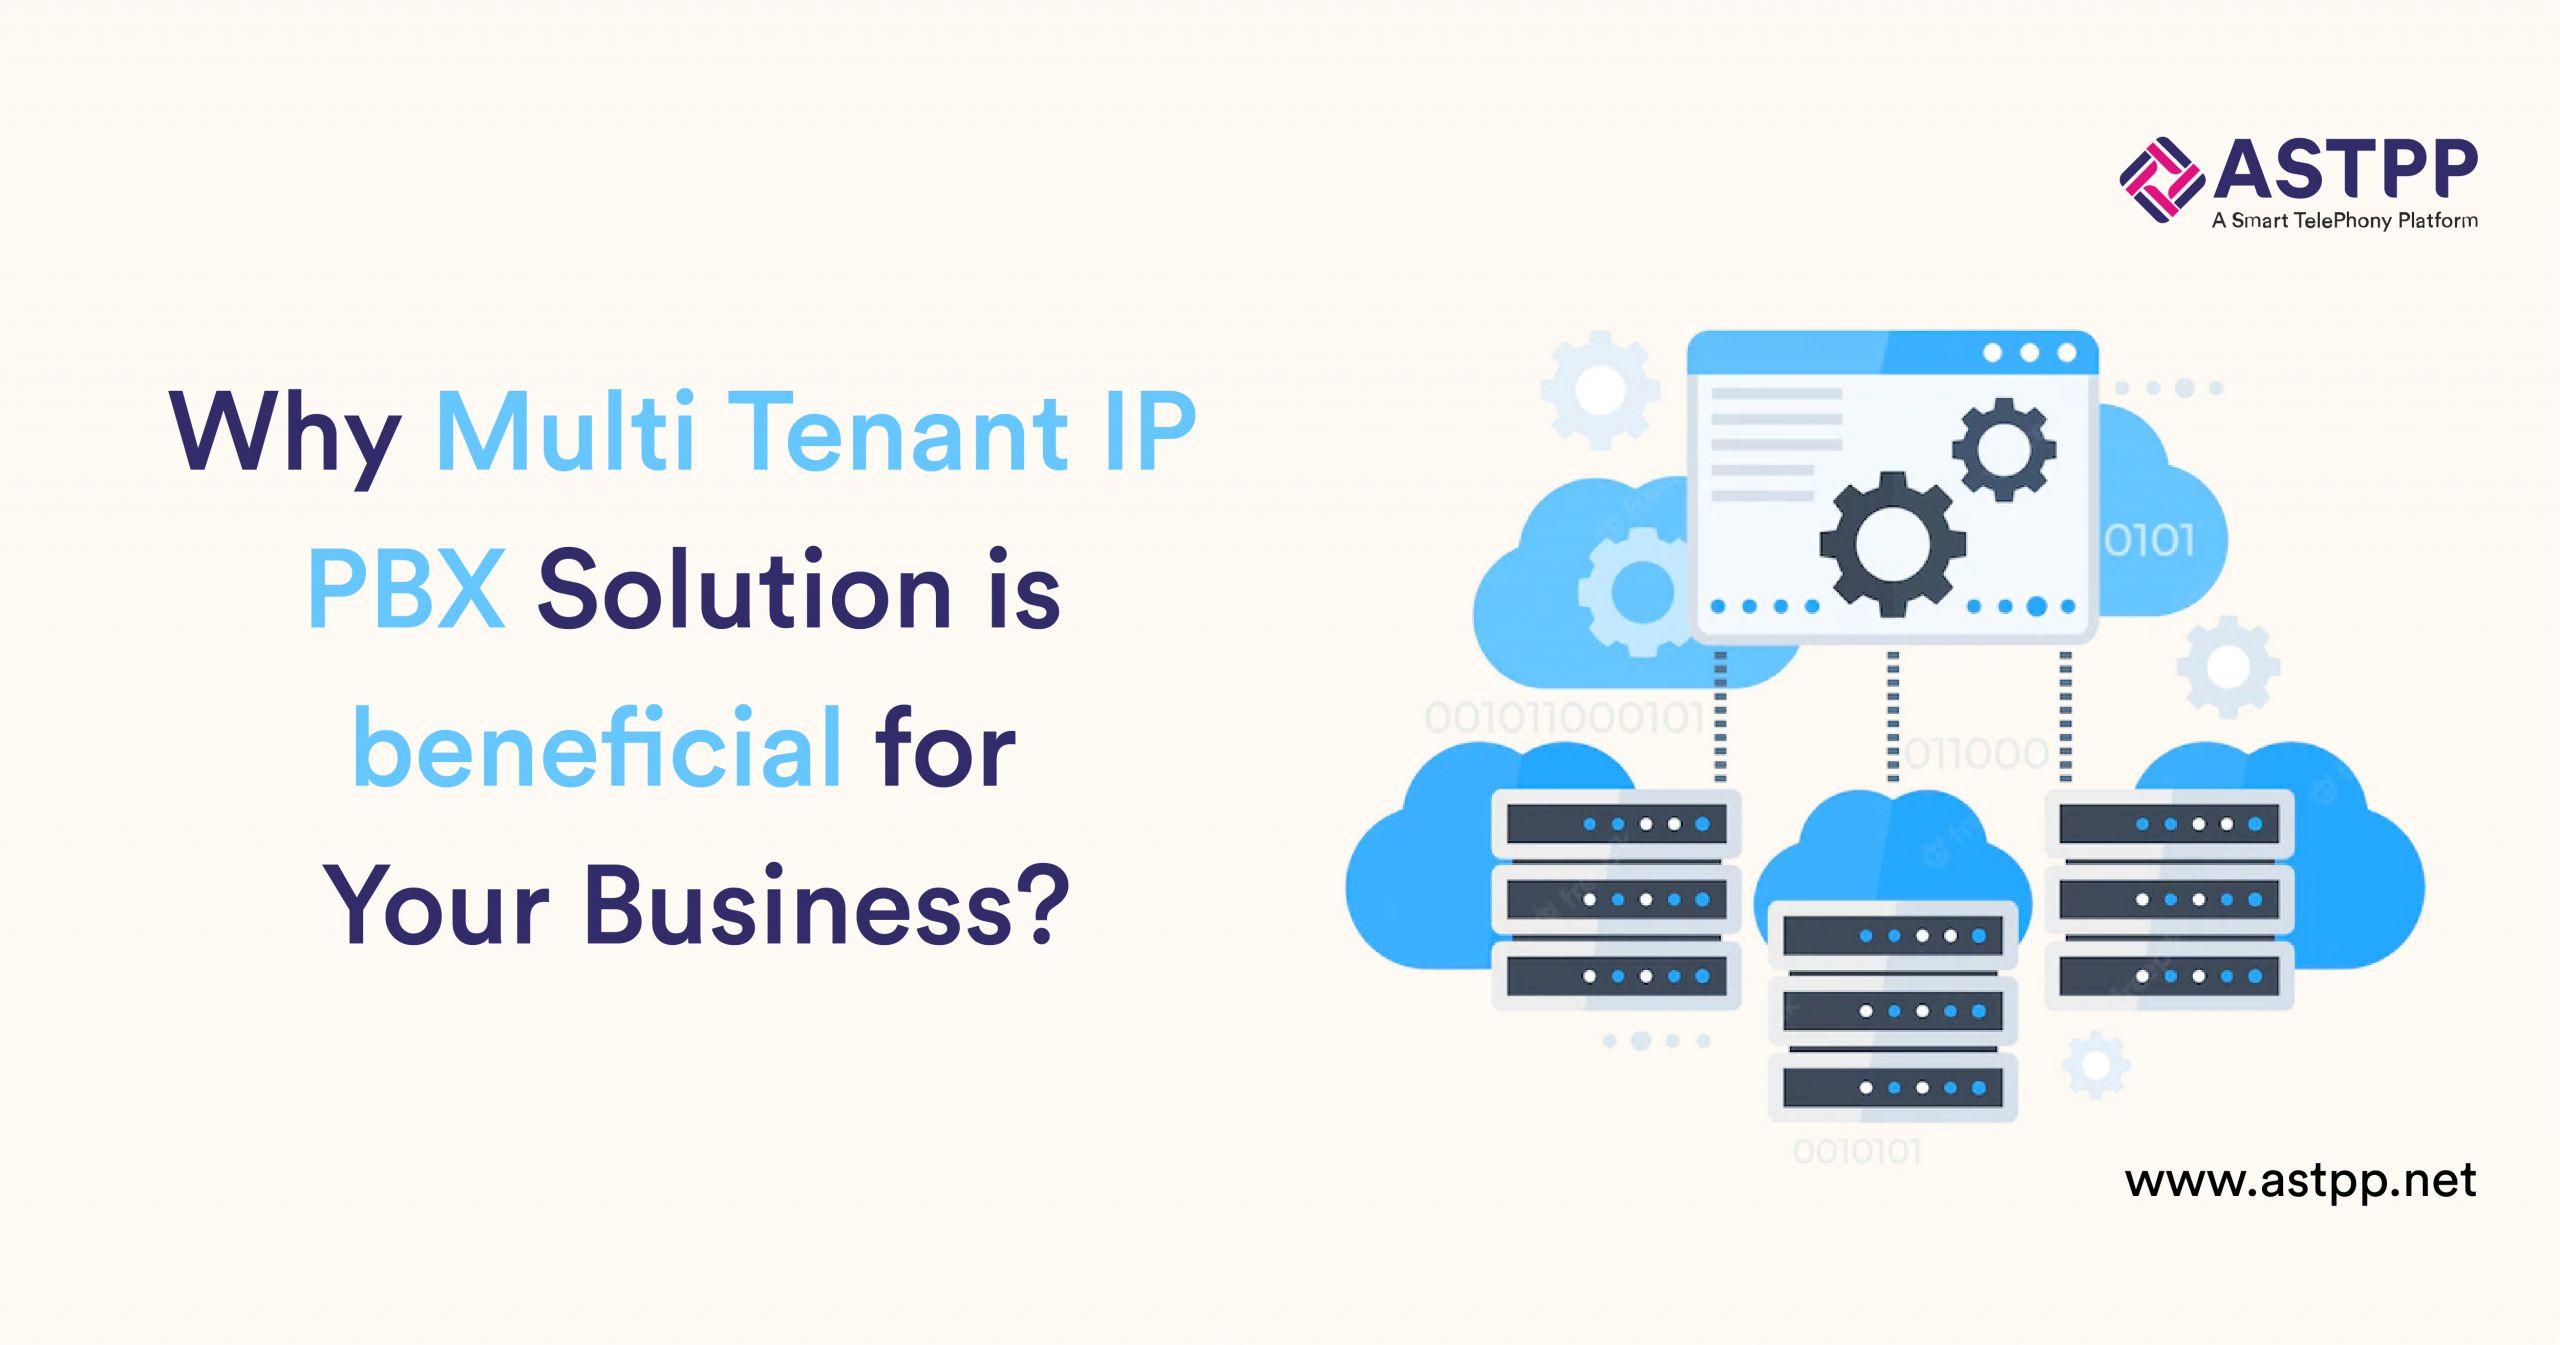 Top Reasons to Use a Multi Tenant IP PBX Solution for Your Business